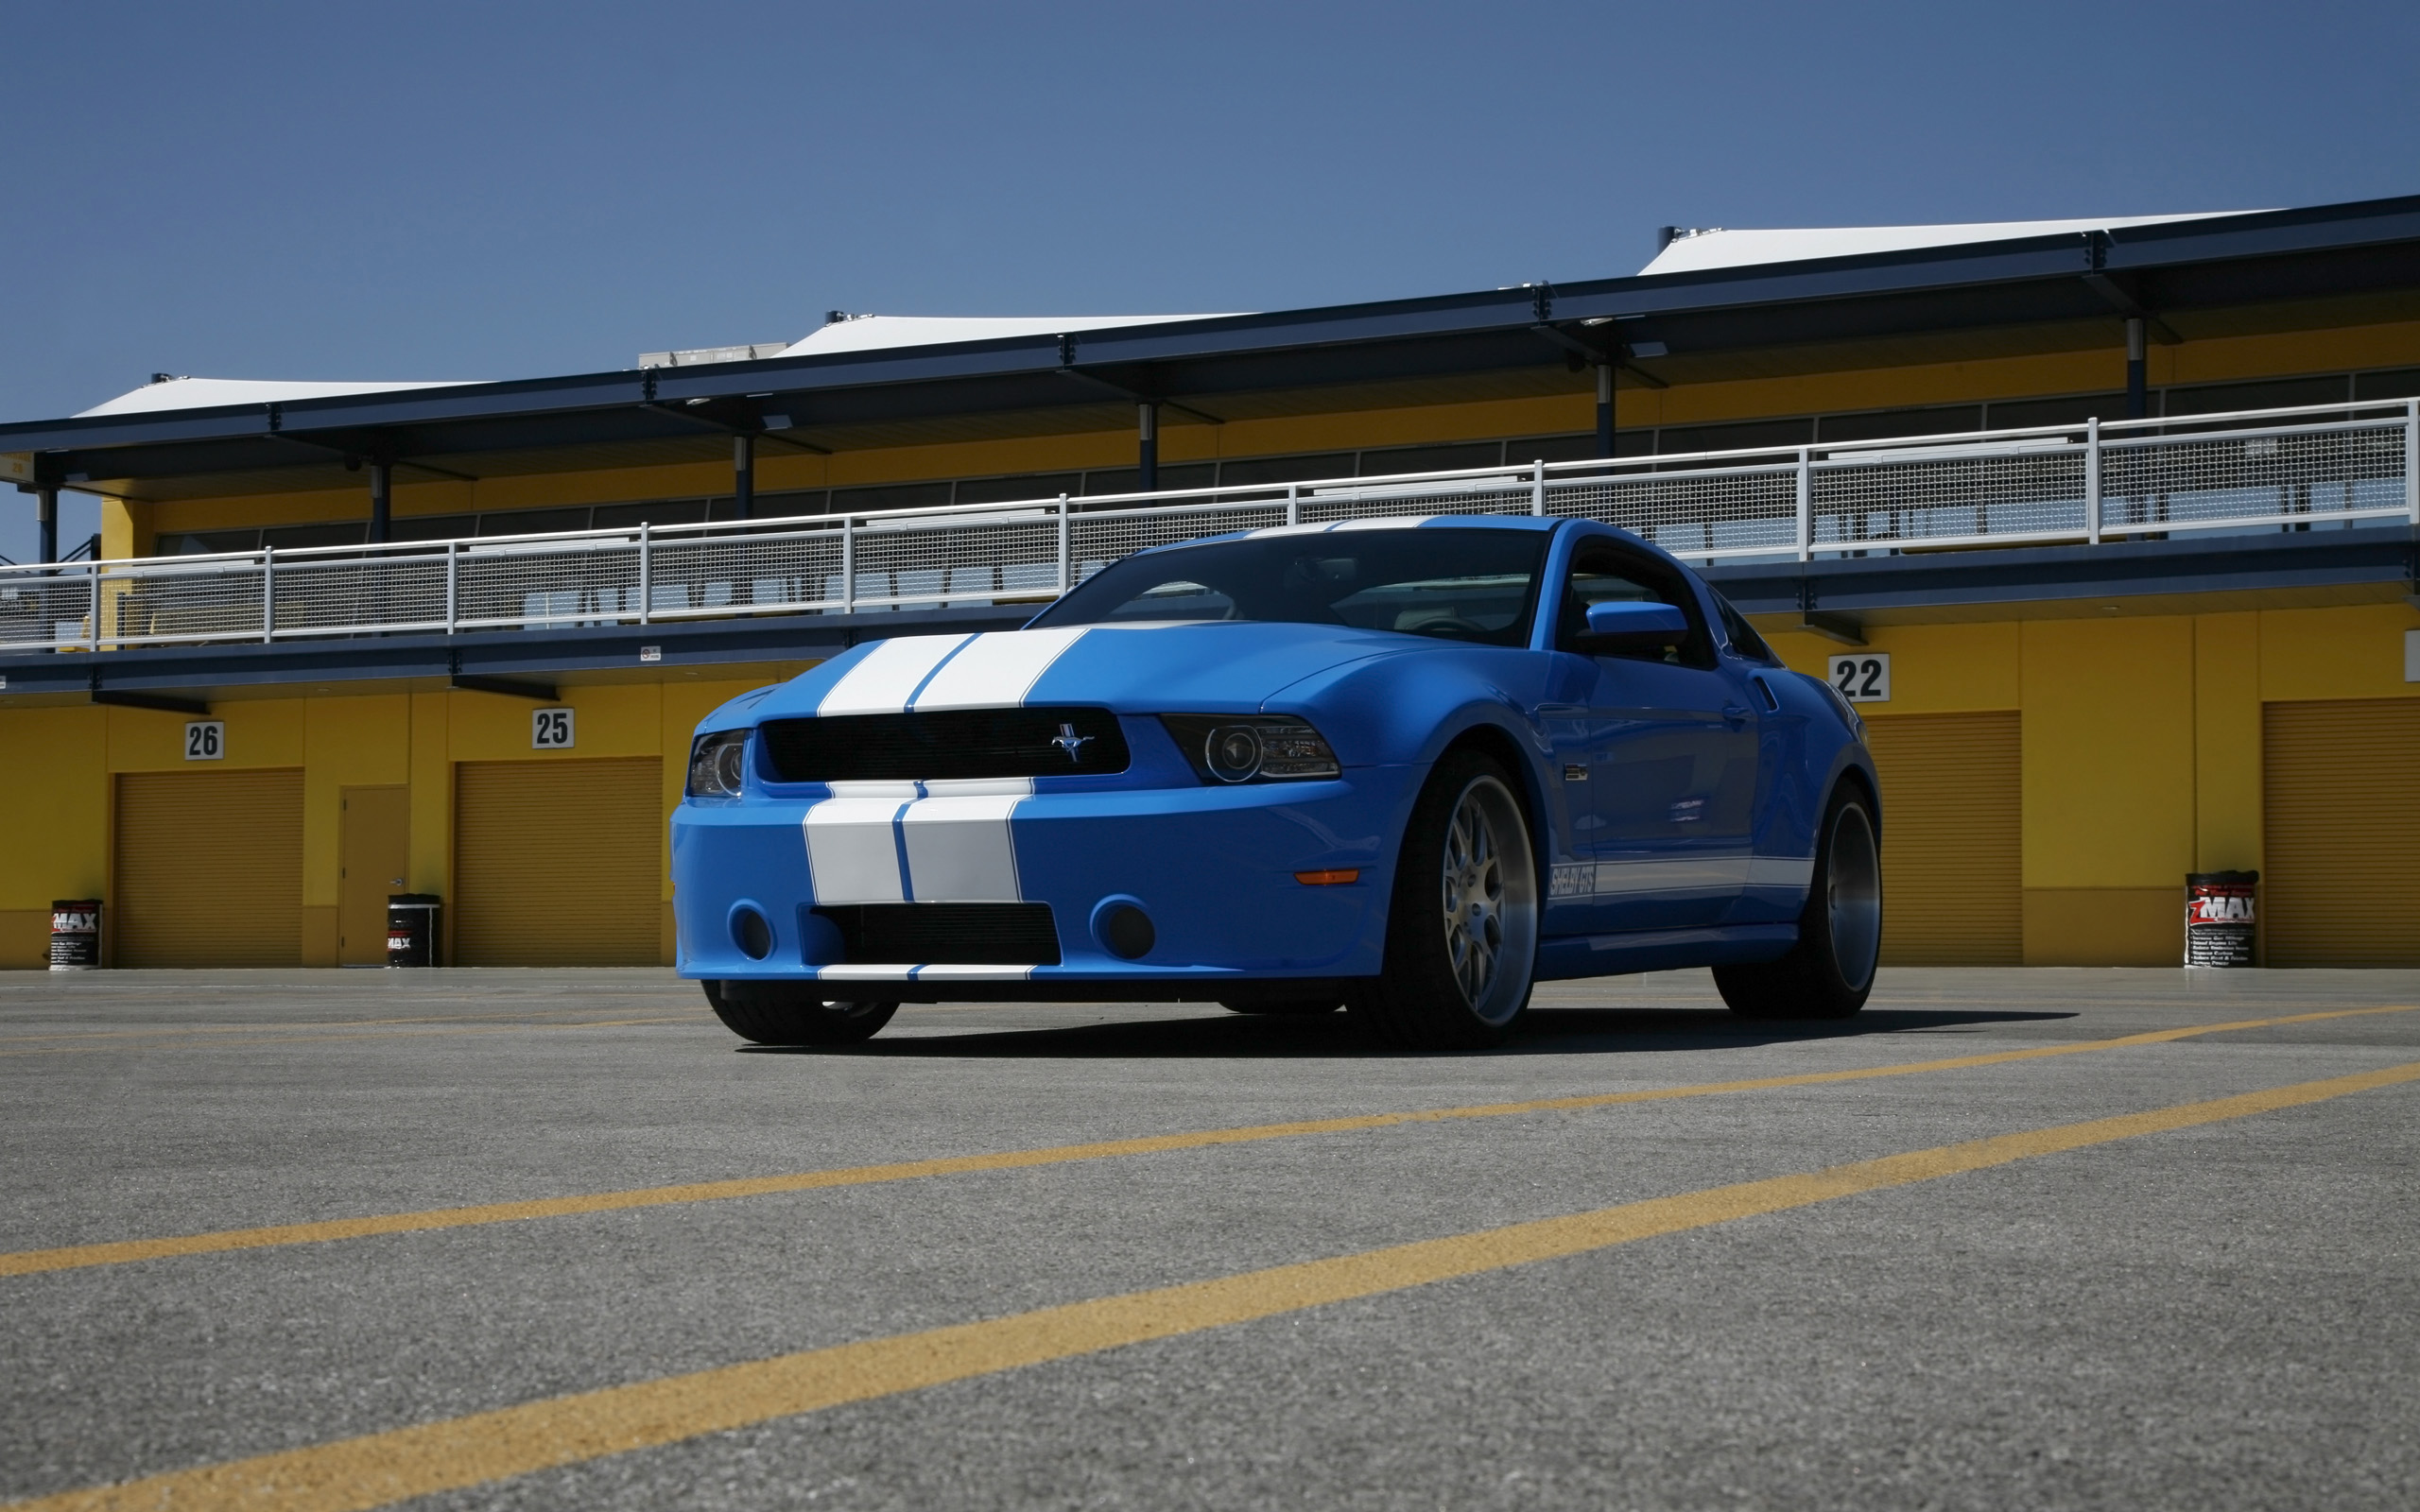 2013, Shelby, Gts, Ford, Mustang, Muscle, Supercar Wallpaper